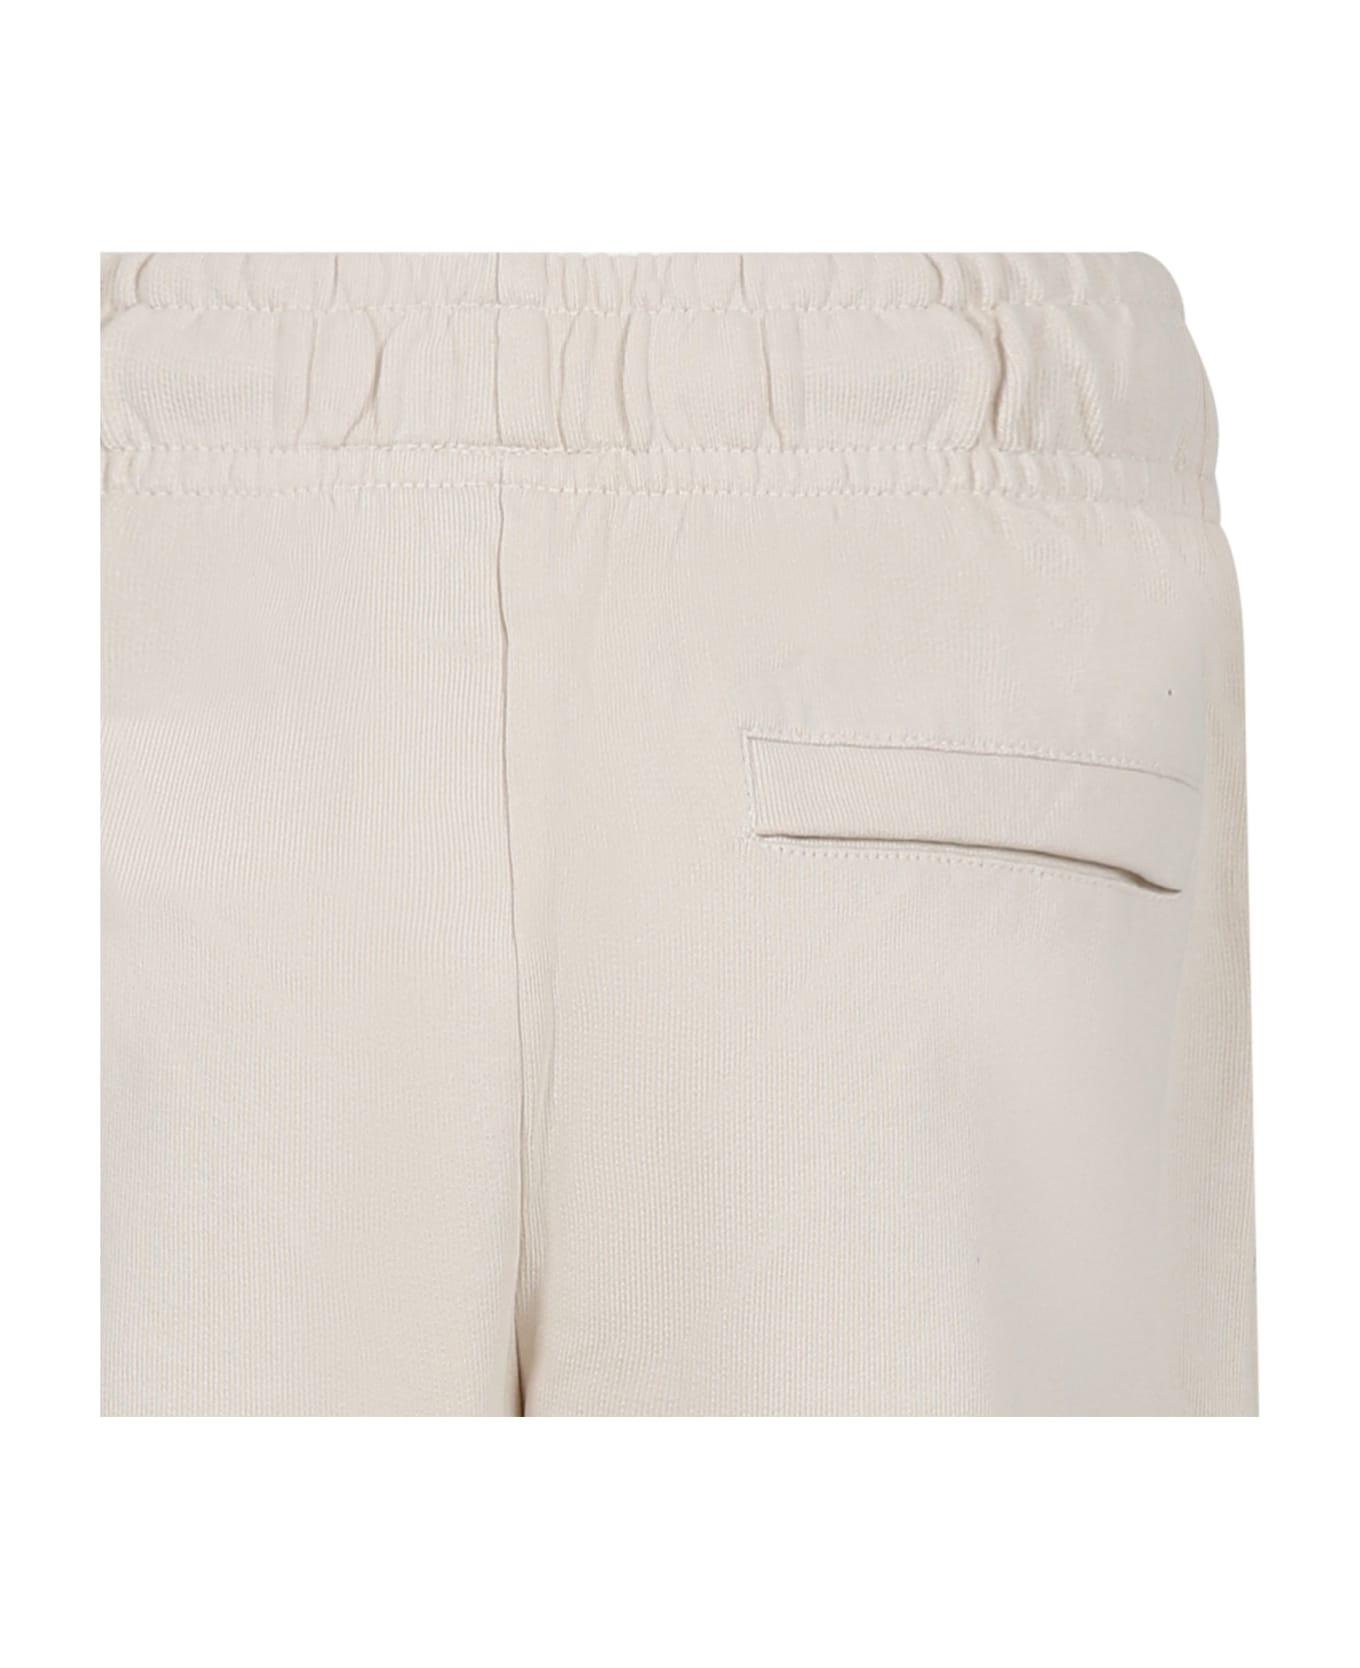 Molo Ivory Trousers For Boys With Flame Print - White